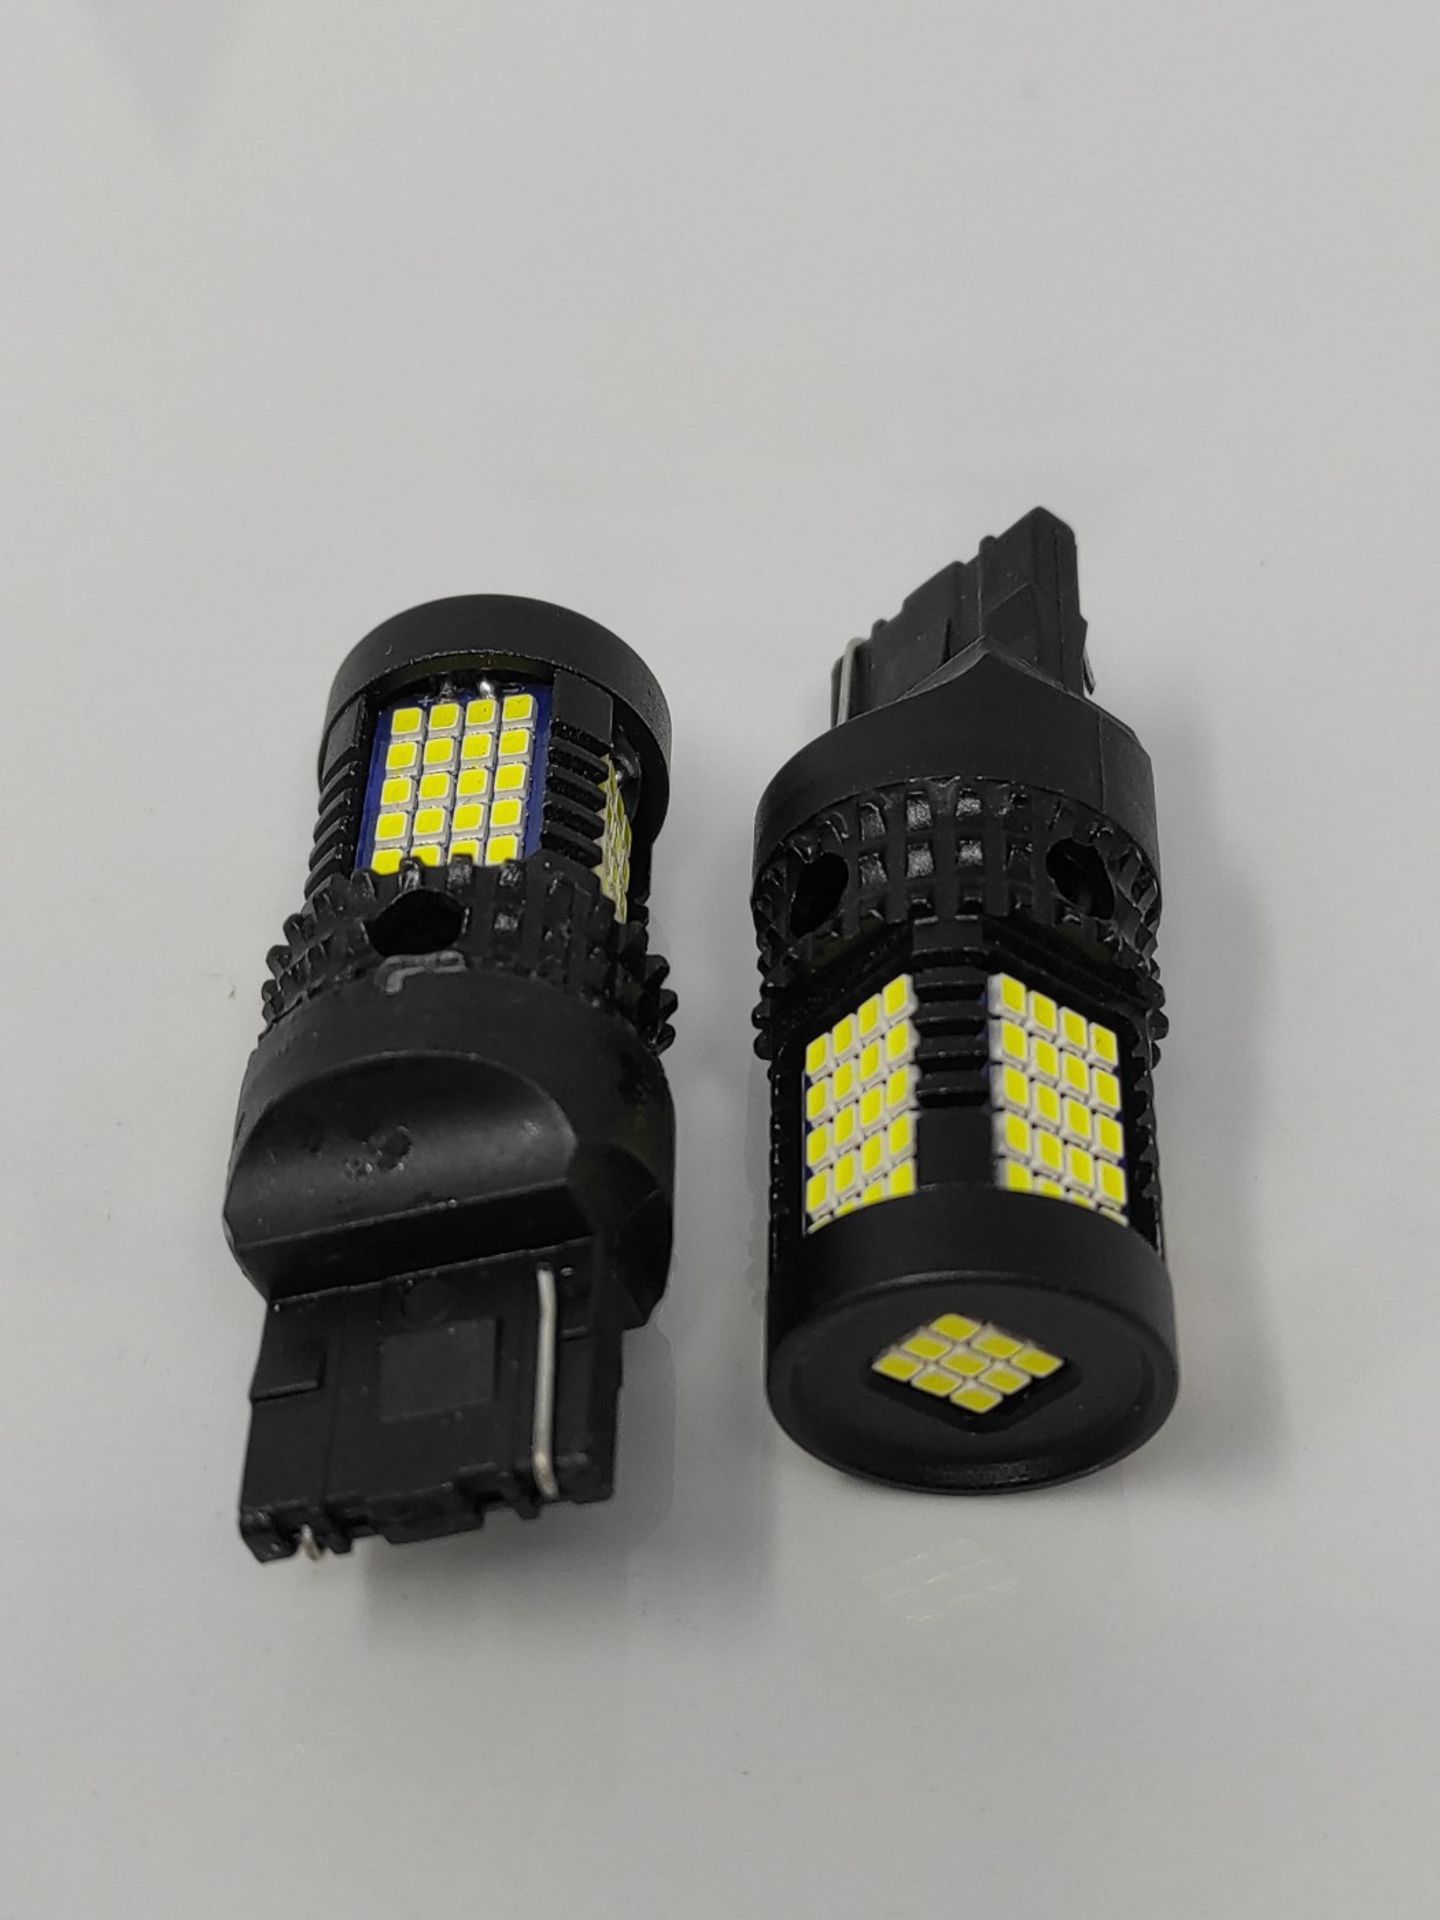 W21W 7440 LED Bulbs Extremely Bright White, NATGIC T20 7440LL 7440NA 7441 992 Replacem - Image 2 of 2